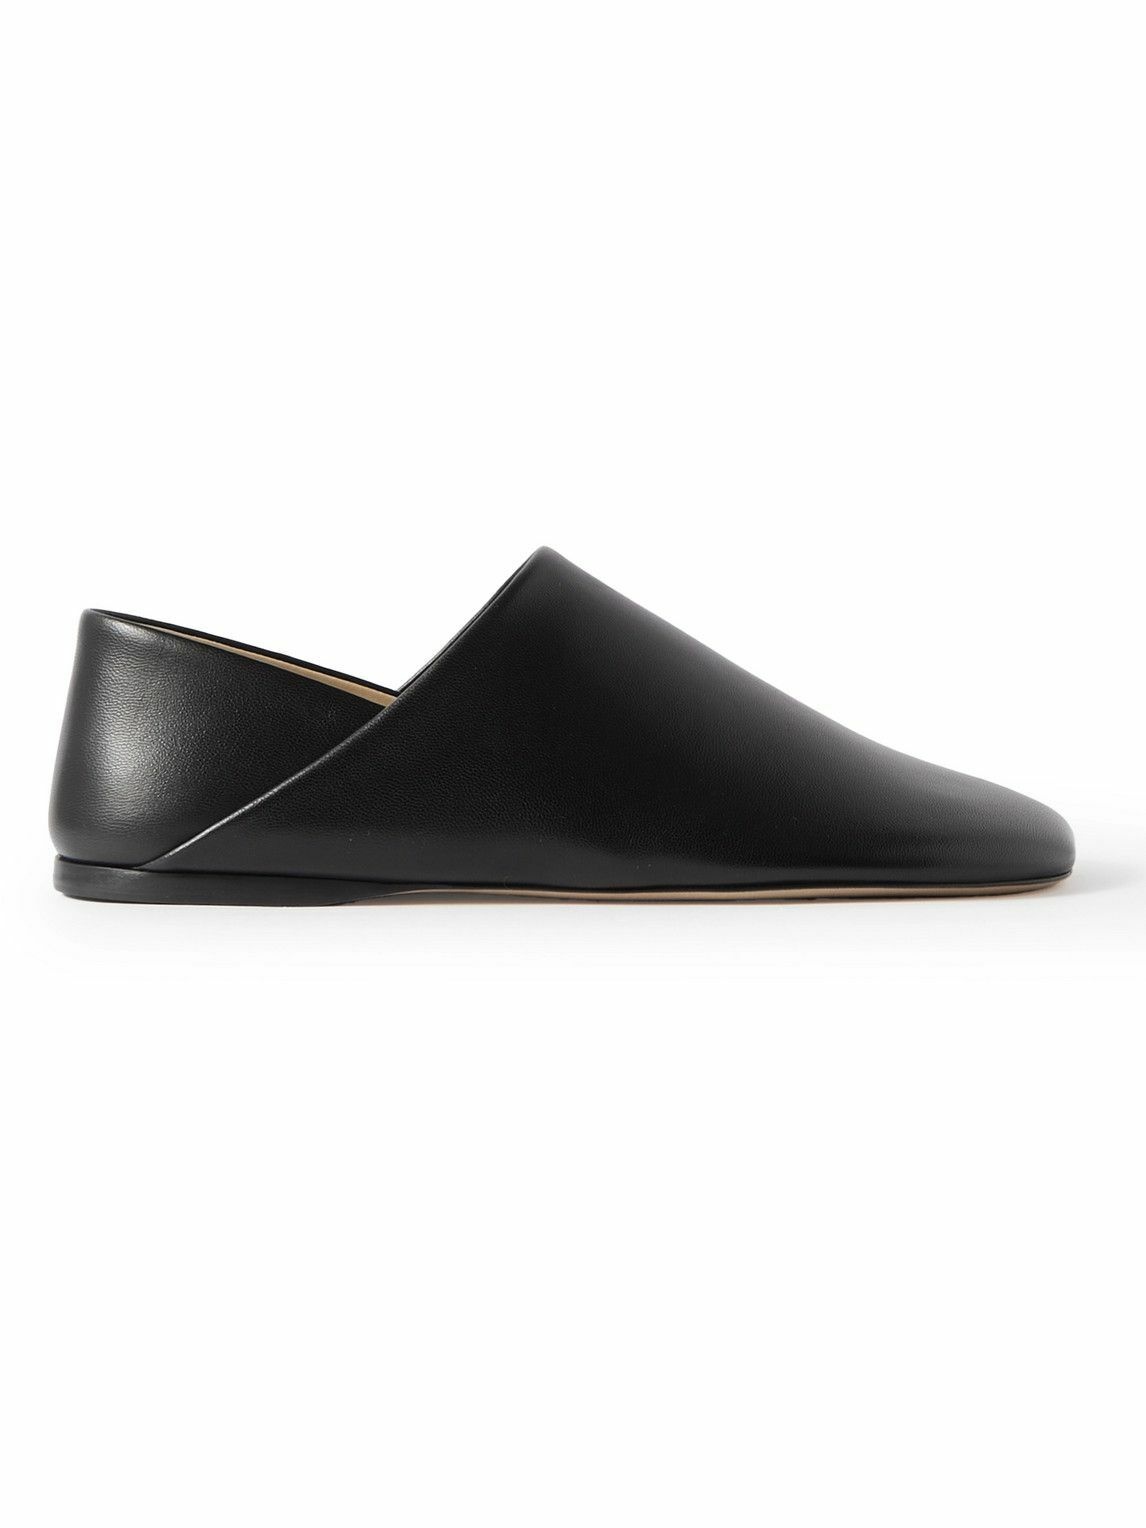 Photo: LOEWE - Toy Collapsible-Heel Leather Slippers - Black